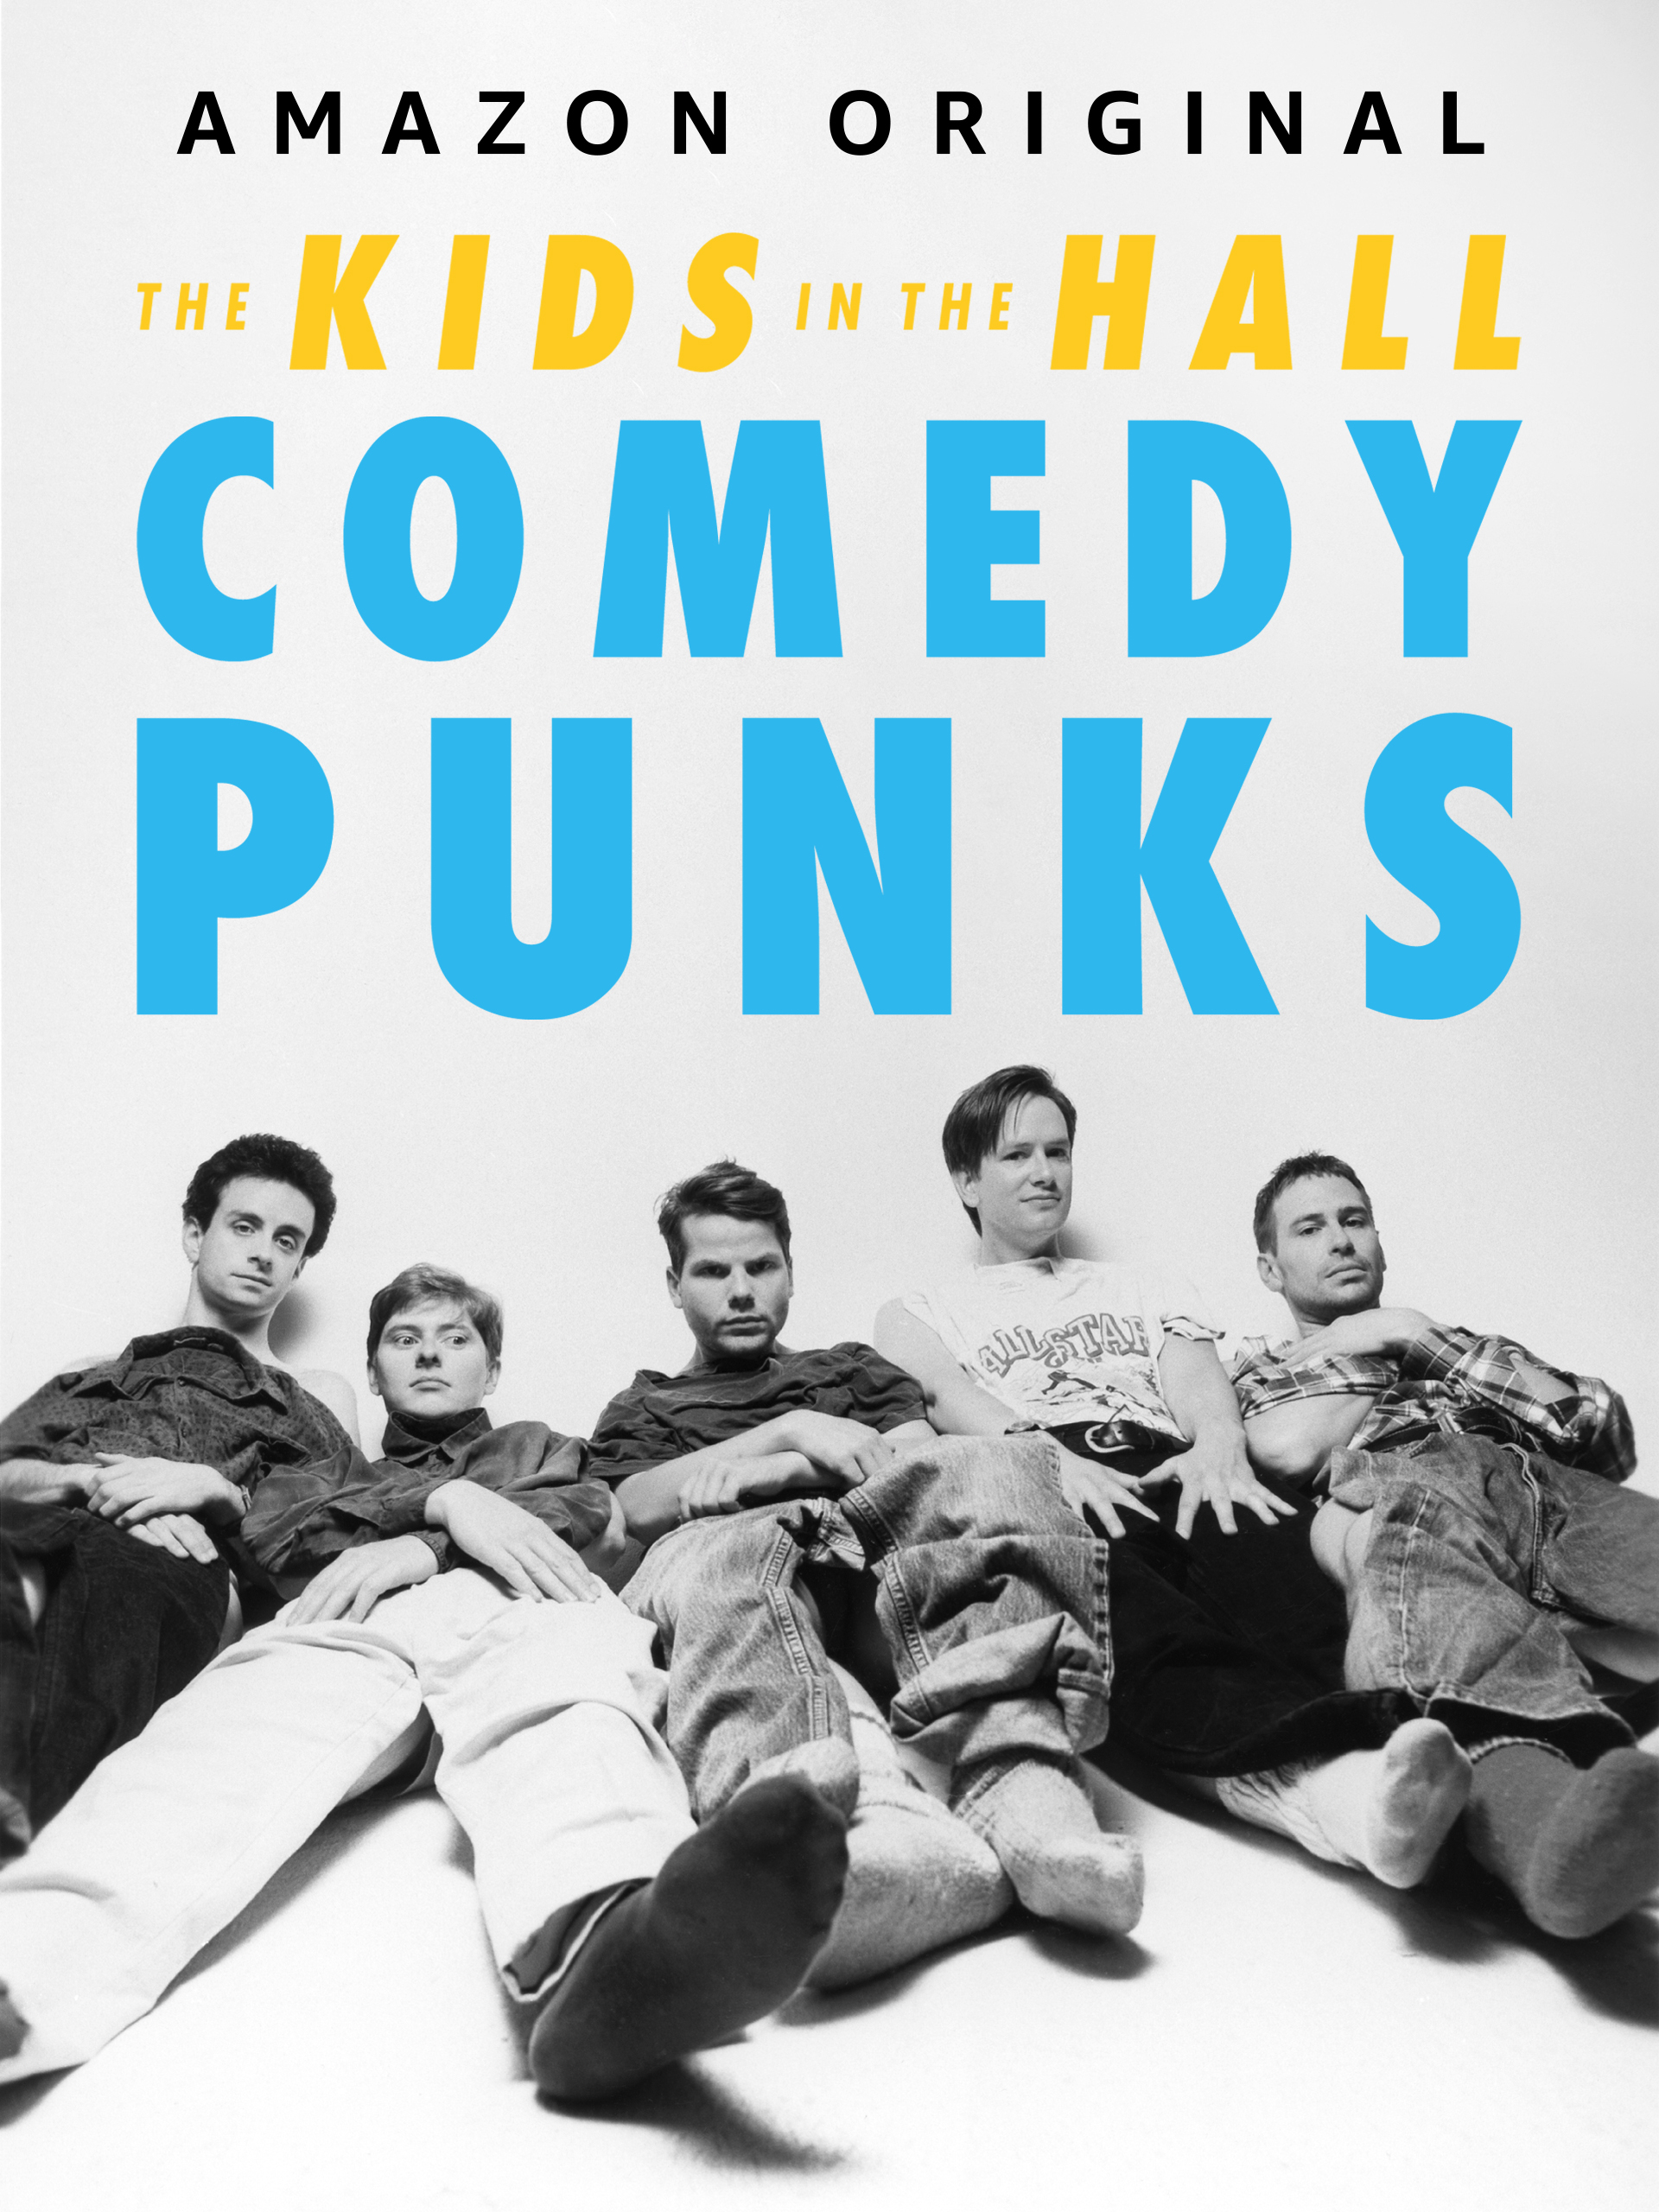 Is The Kids in the Hall Comedy Punks on Prime Video